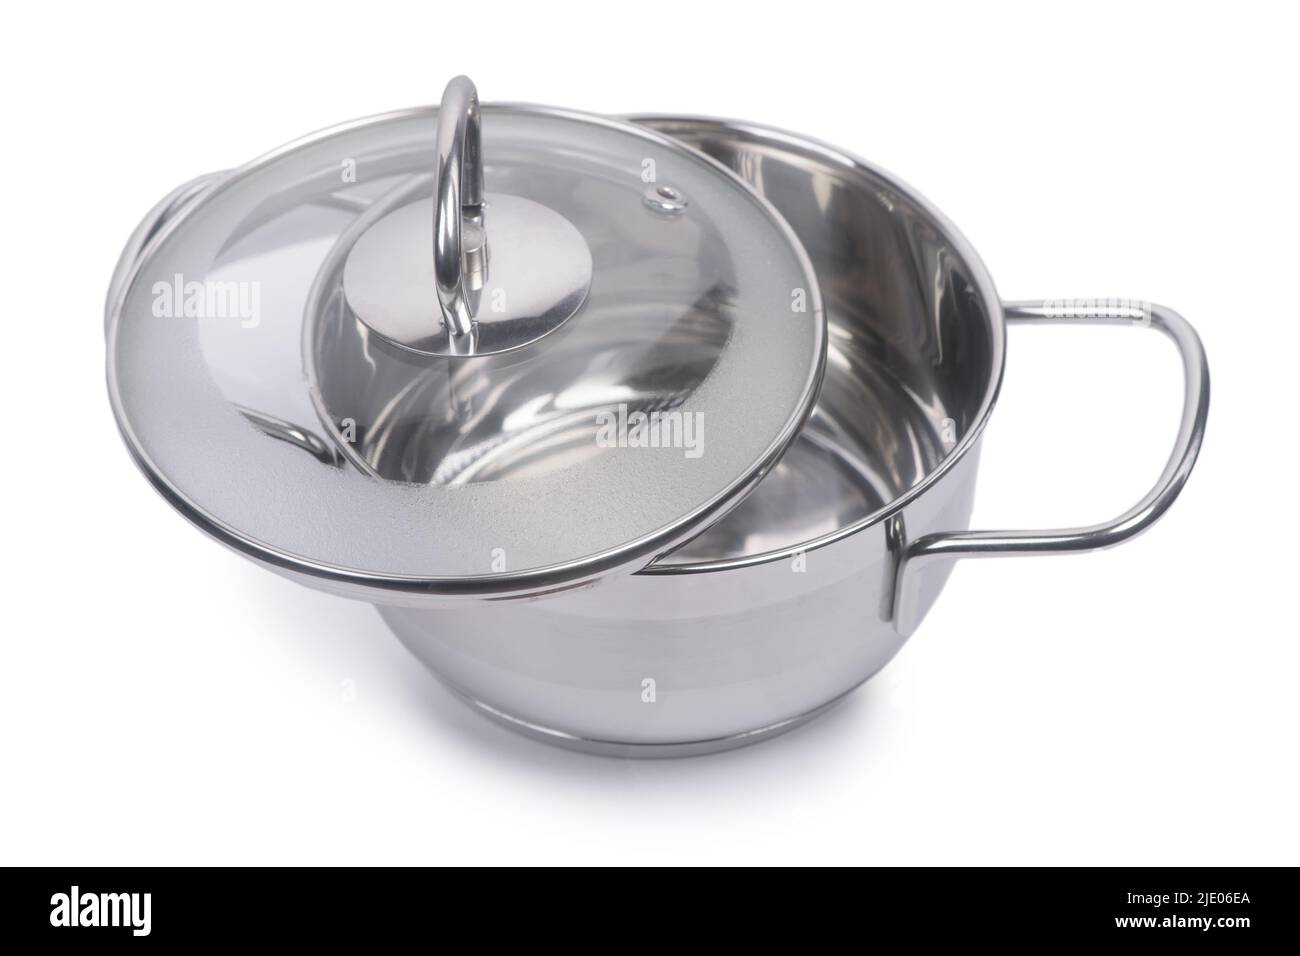 Stainless steel pan with glass lid isolated on white background Stock Photo